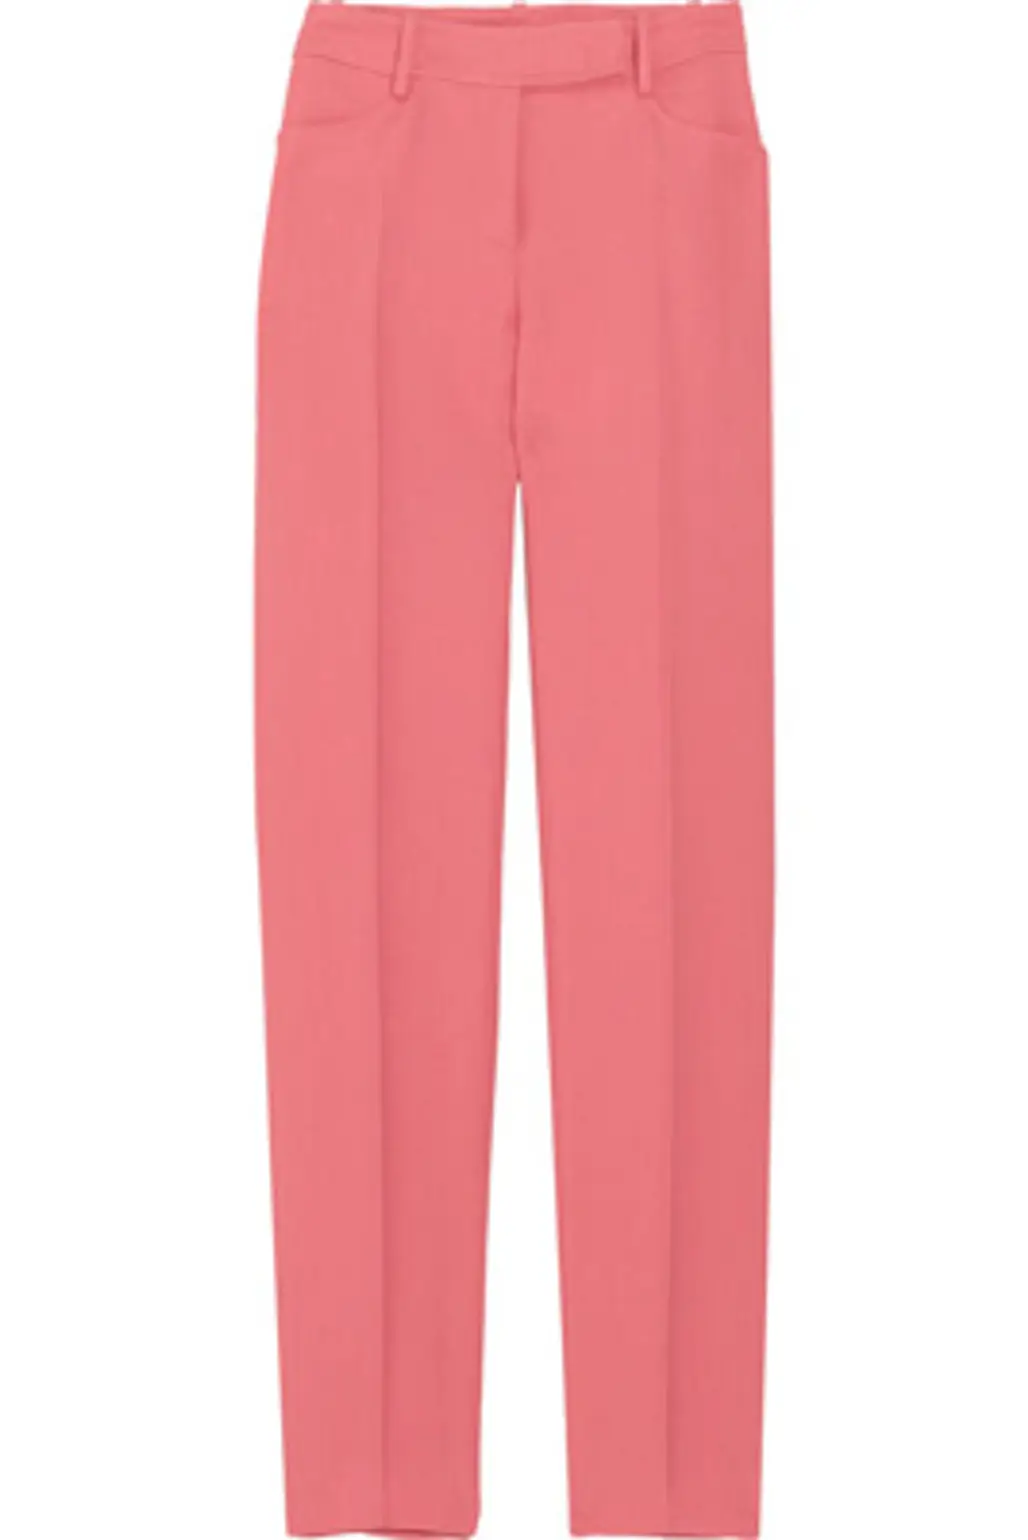 Tailored Pink Pants